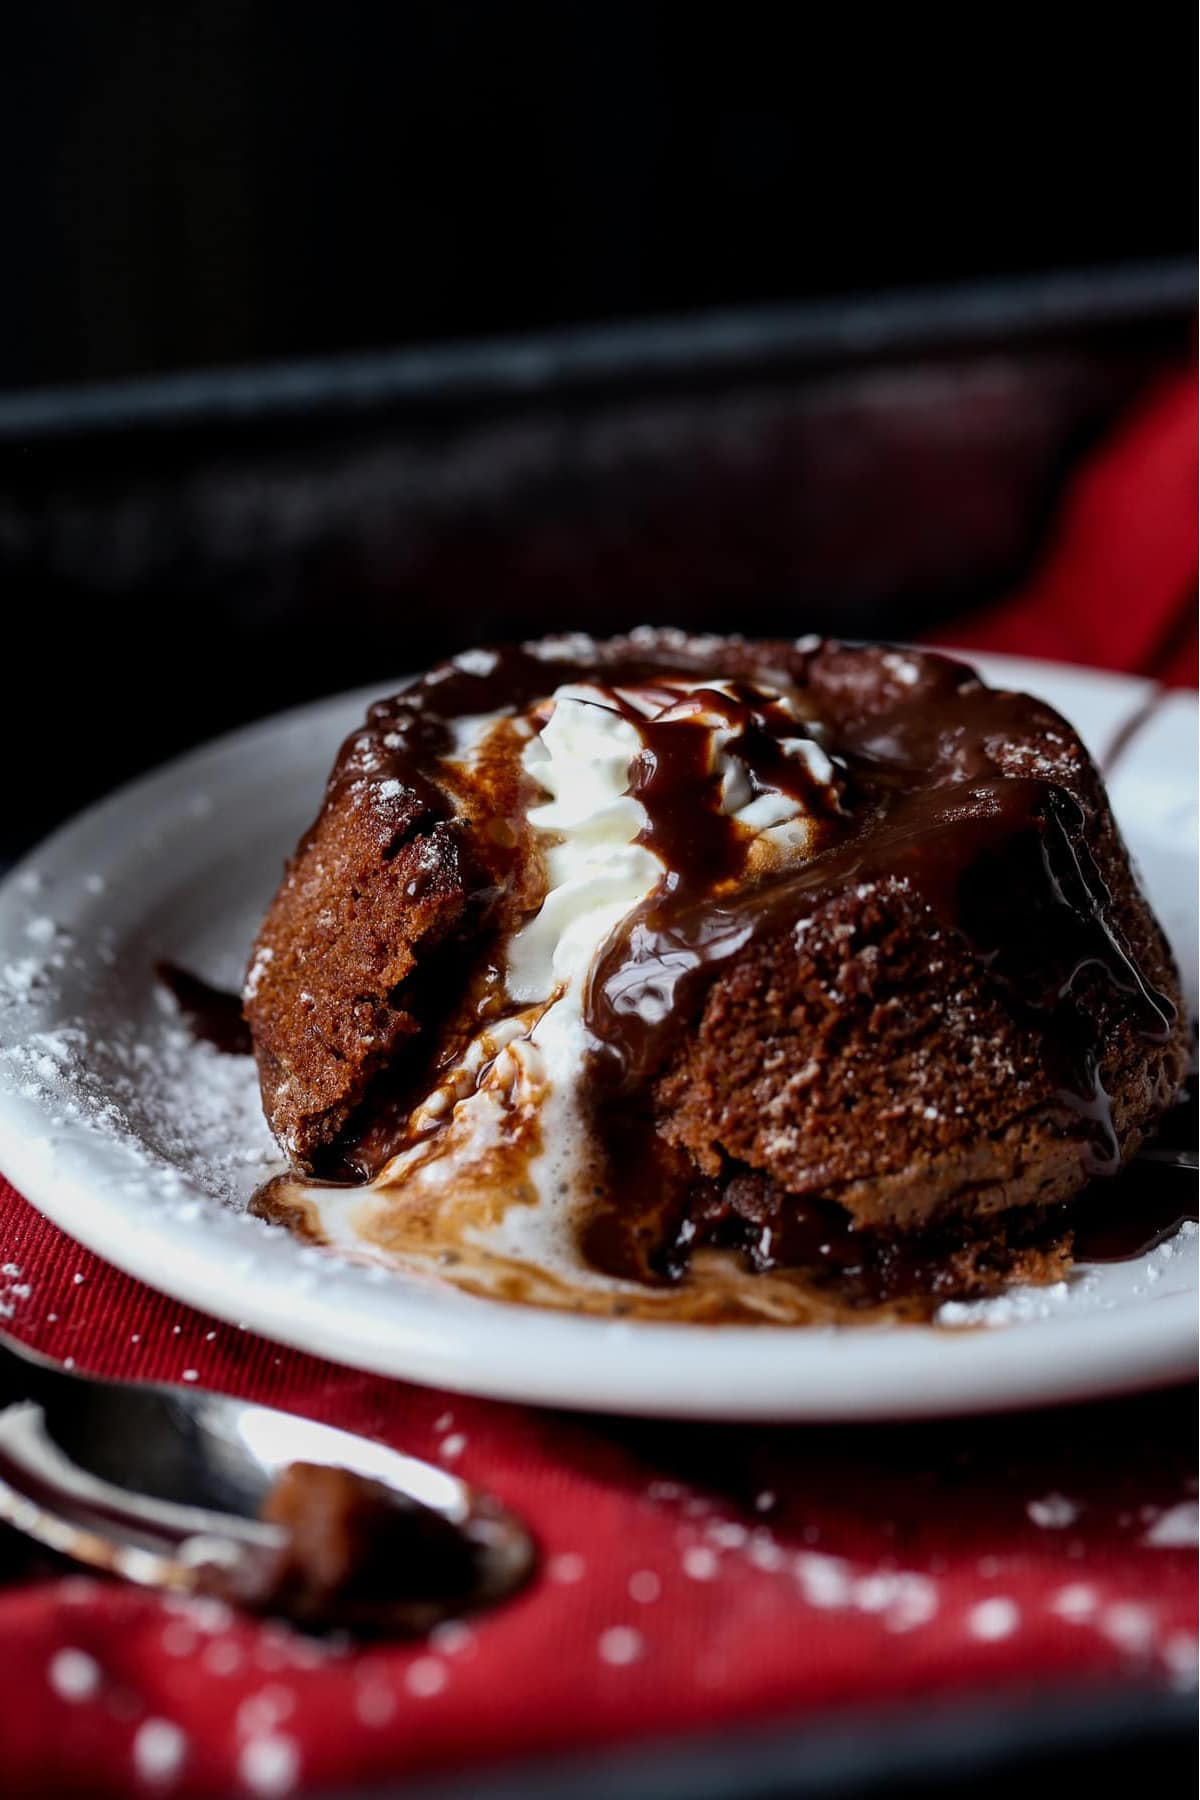 Chocolate Lava Cake topped with whipped cream and hot fudge melting from the inside on a white plate.